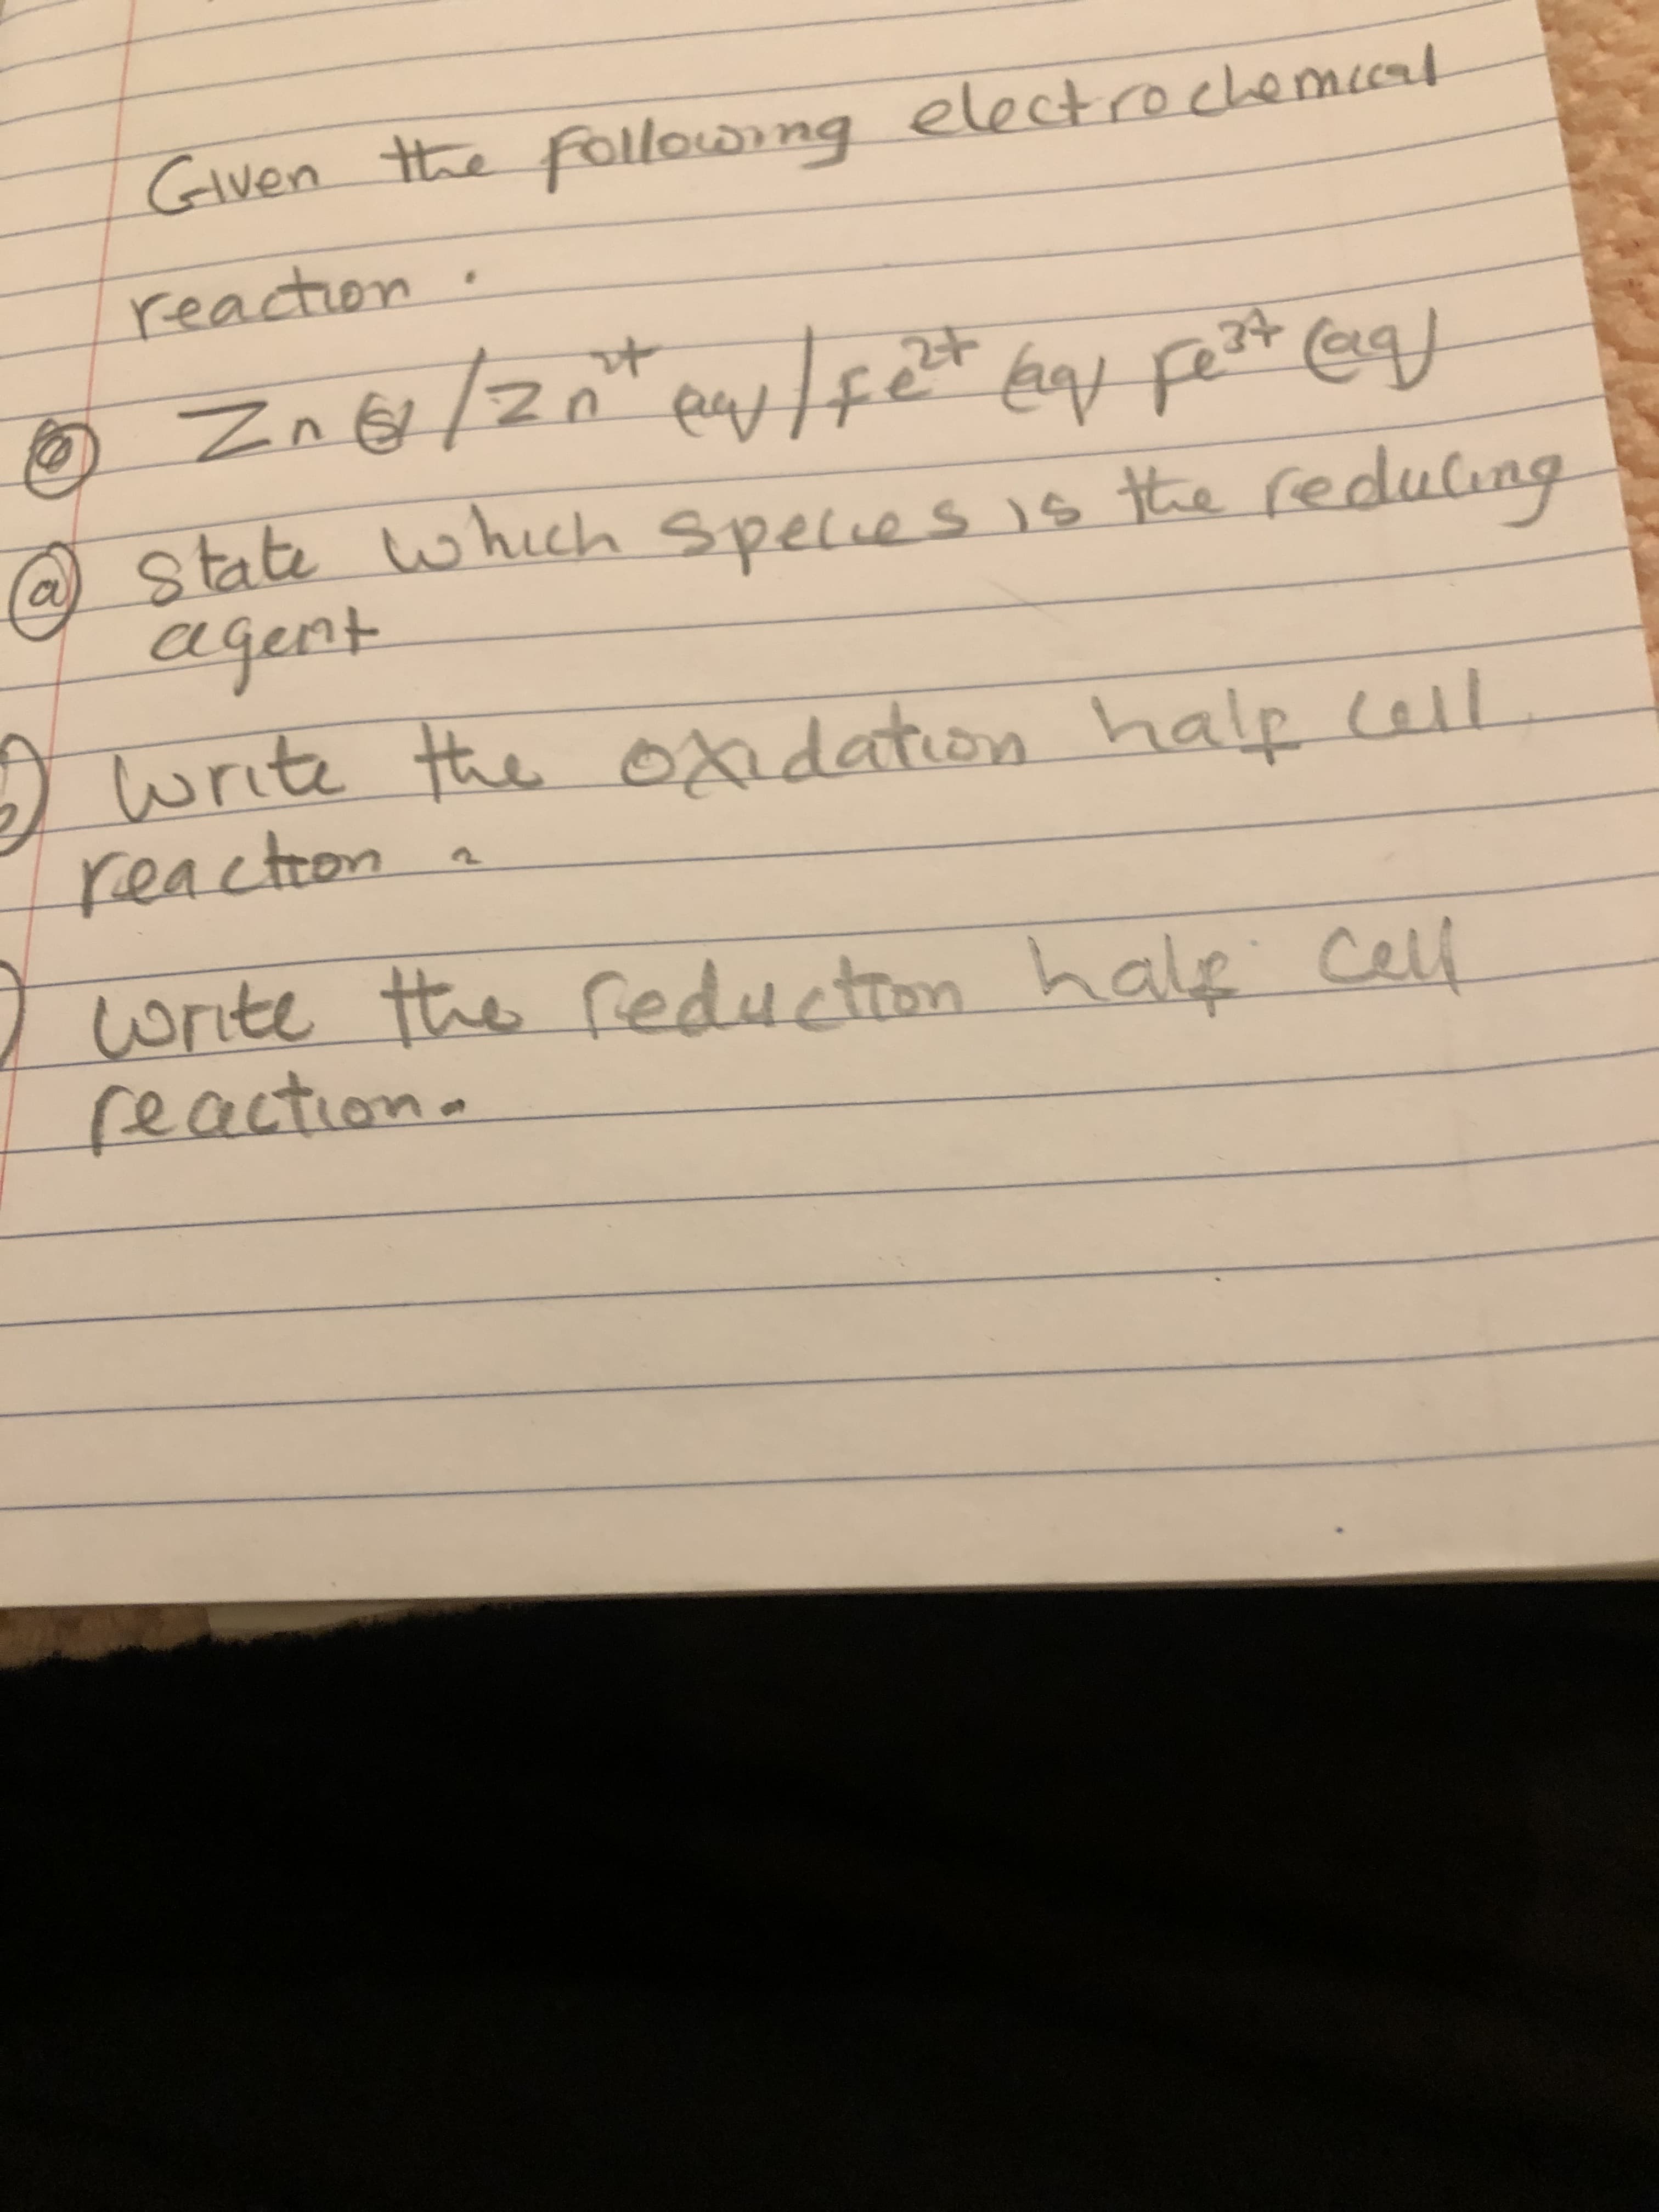 Glven the Following electrochemccal
reaction.
34
2+
State which species
agent
owrite the oxidation halp cell
reaction a
sis the reduleng
write the reduction half Cell
reaction.
